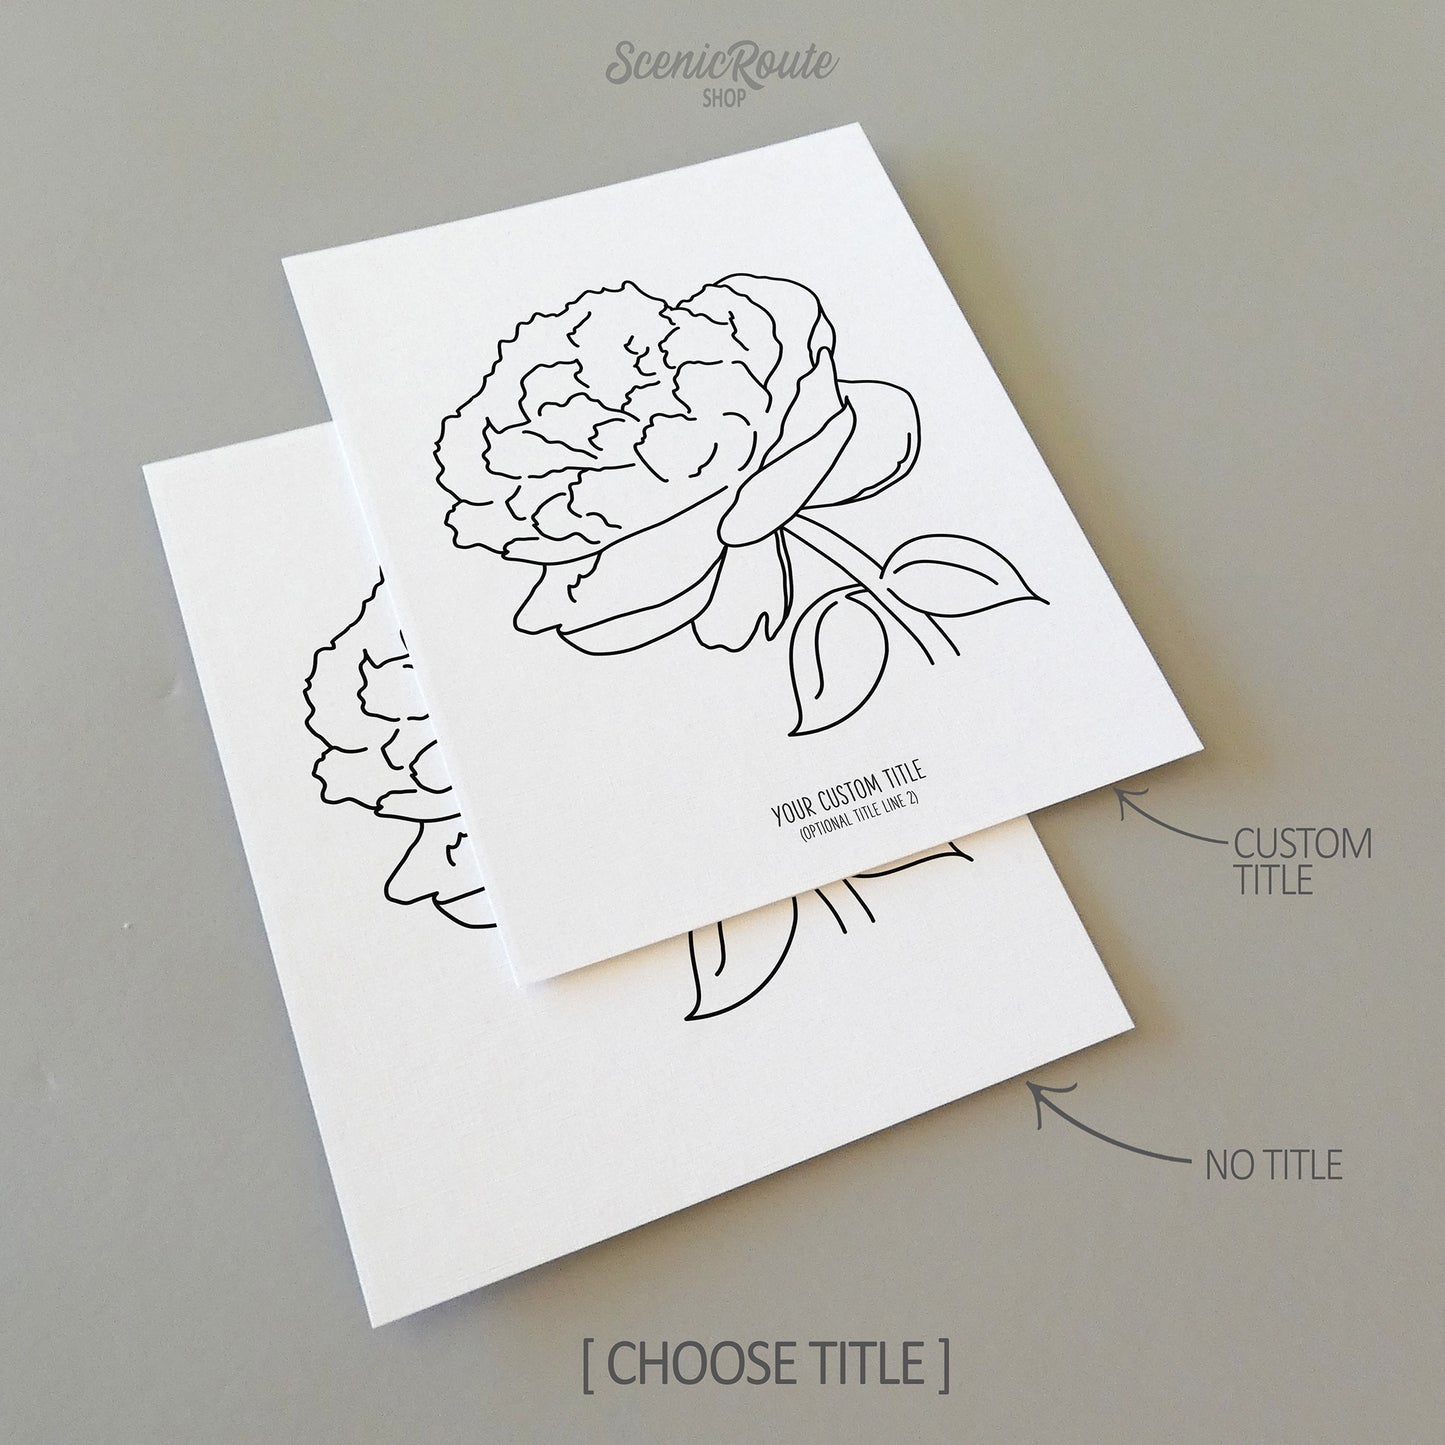 Two line art drawings of a Peony Flower on white linen paper with a gray background.  The pieces are shown with “No Title” and “Custom Title” options for the available art print options.